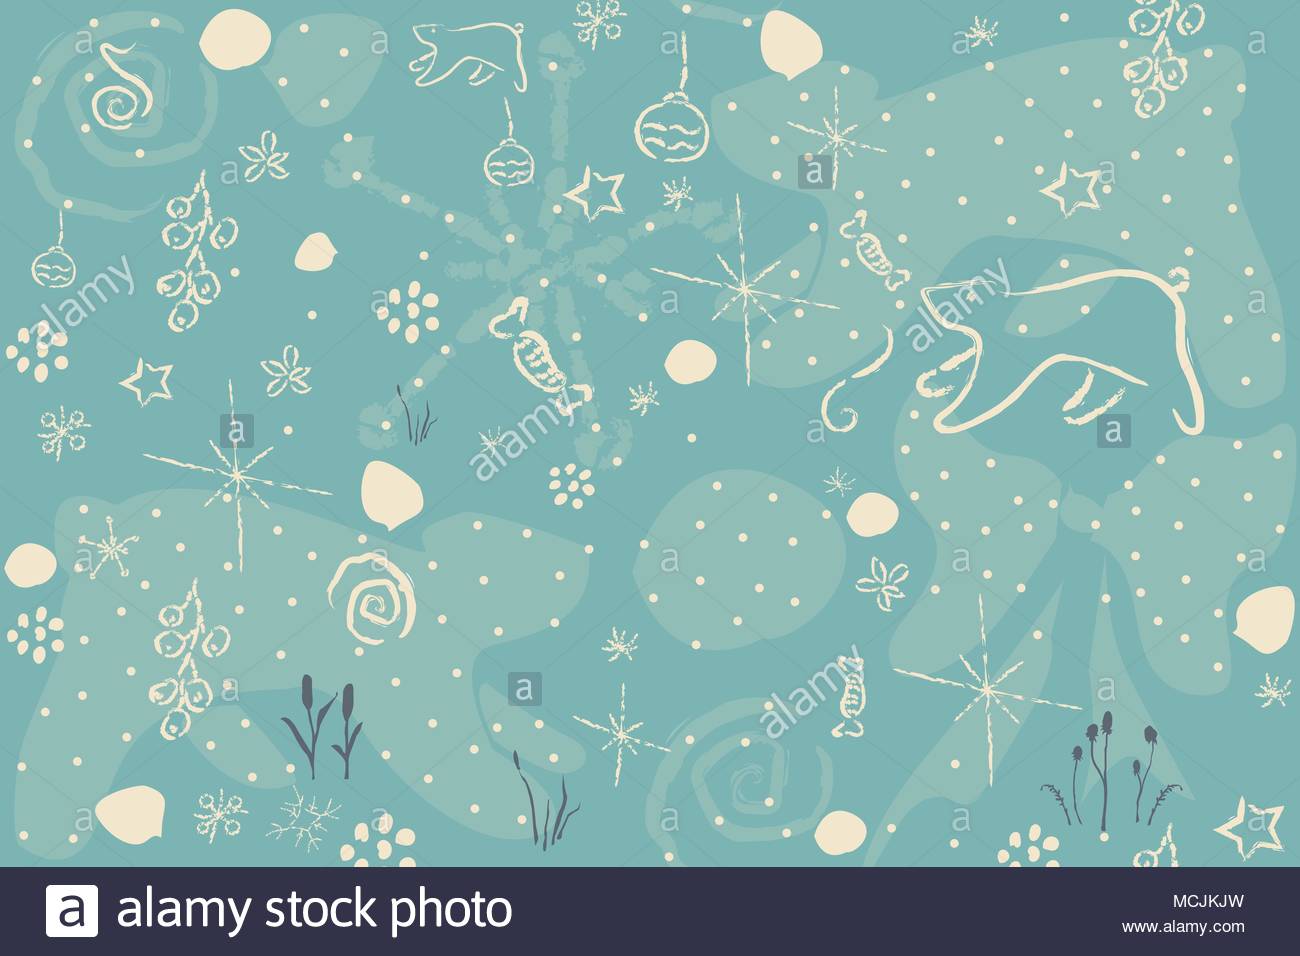 Cute Winter Background With Hand Drawn Snowflakes Polar Bear